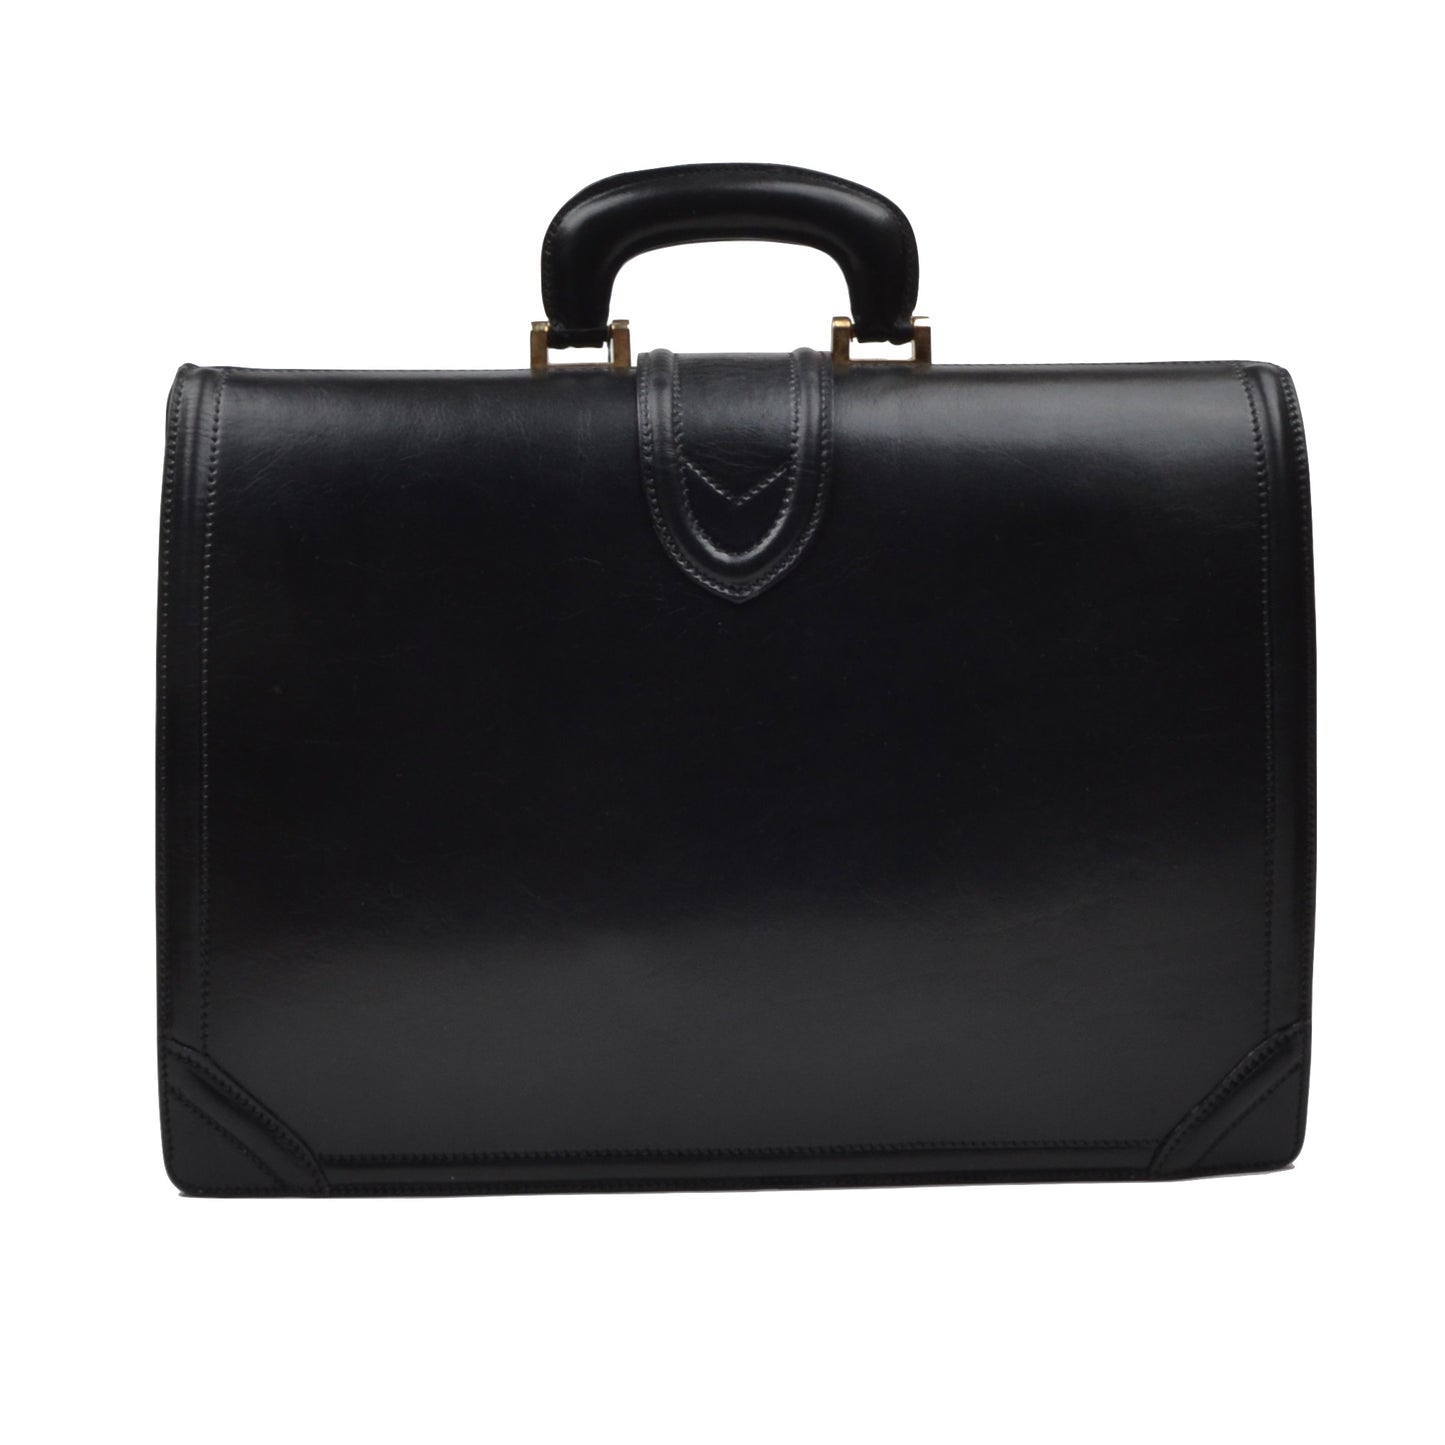 Executive Leather Briefcase/Doctor's Bag - Black